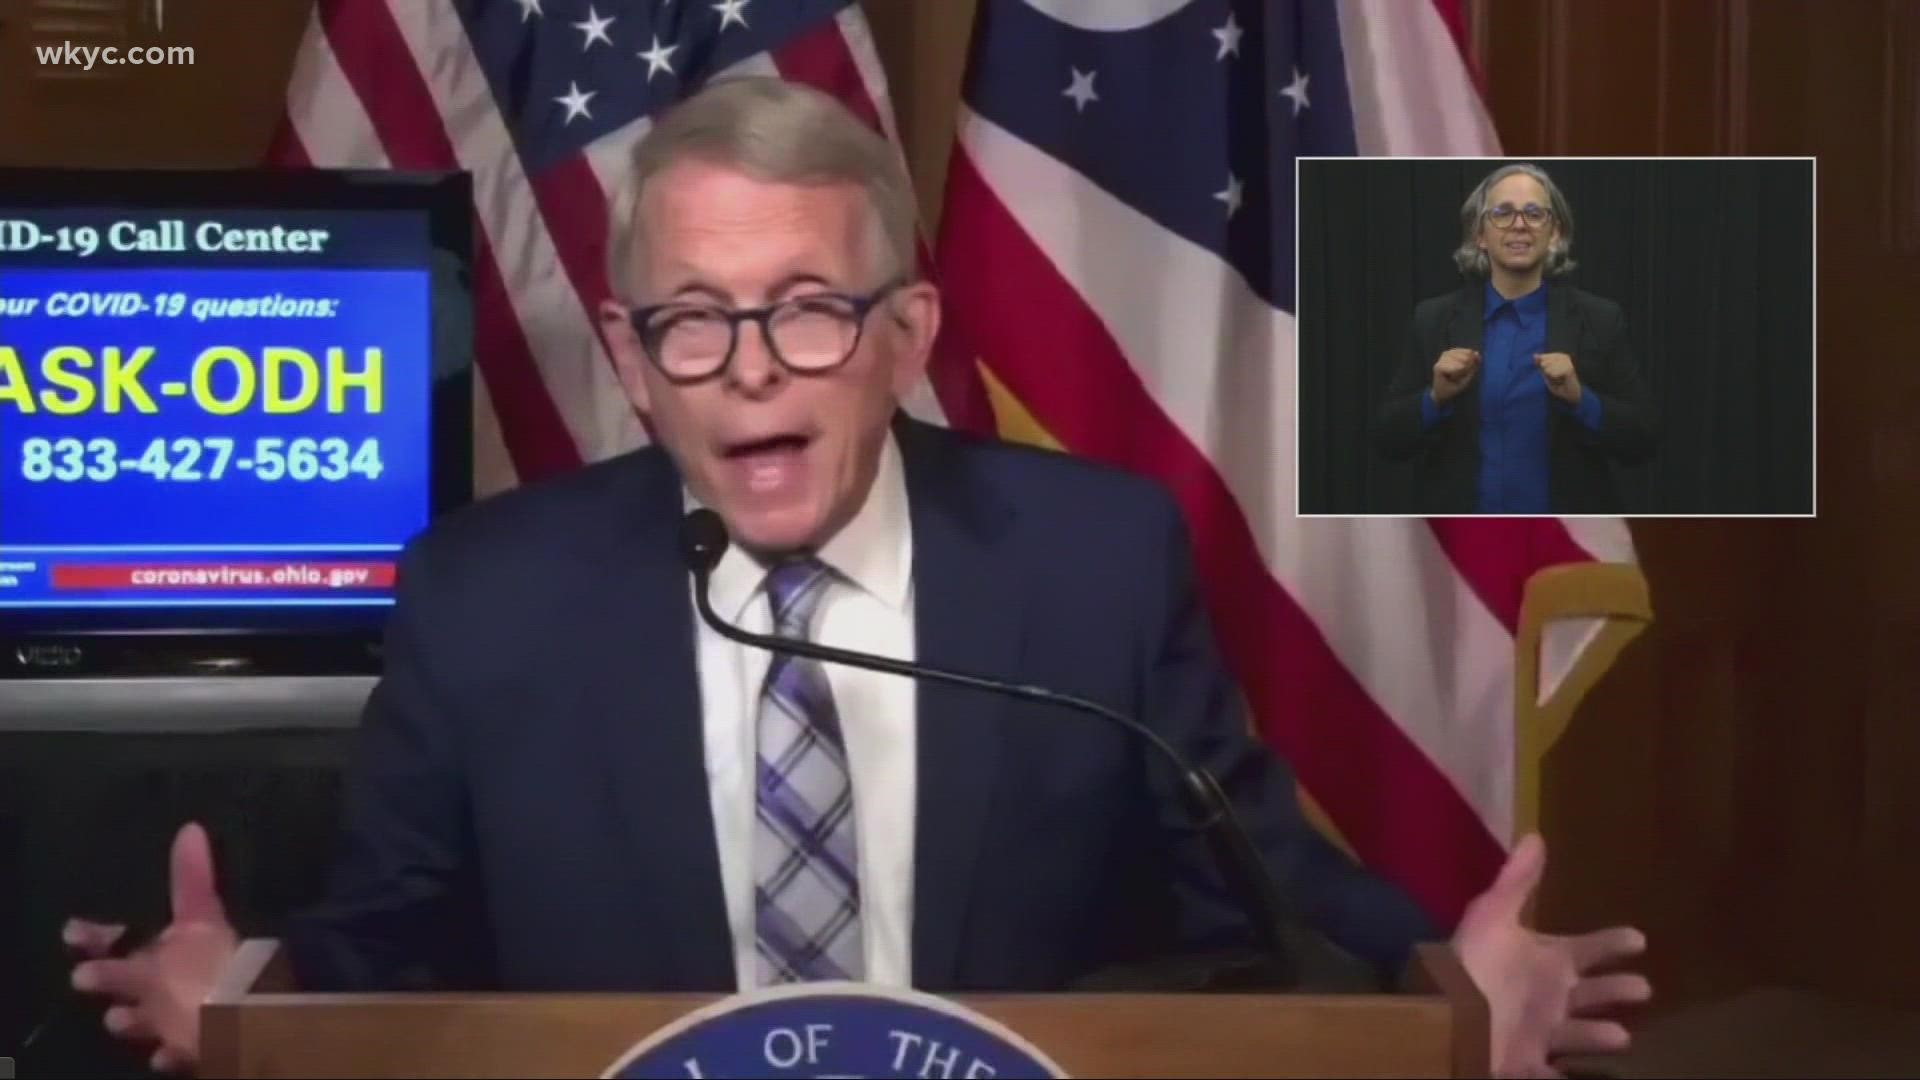 Ohio Governor, Mike DeWine held a press briefing on Tuesday. Monica Robins has the details on what he said.